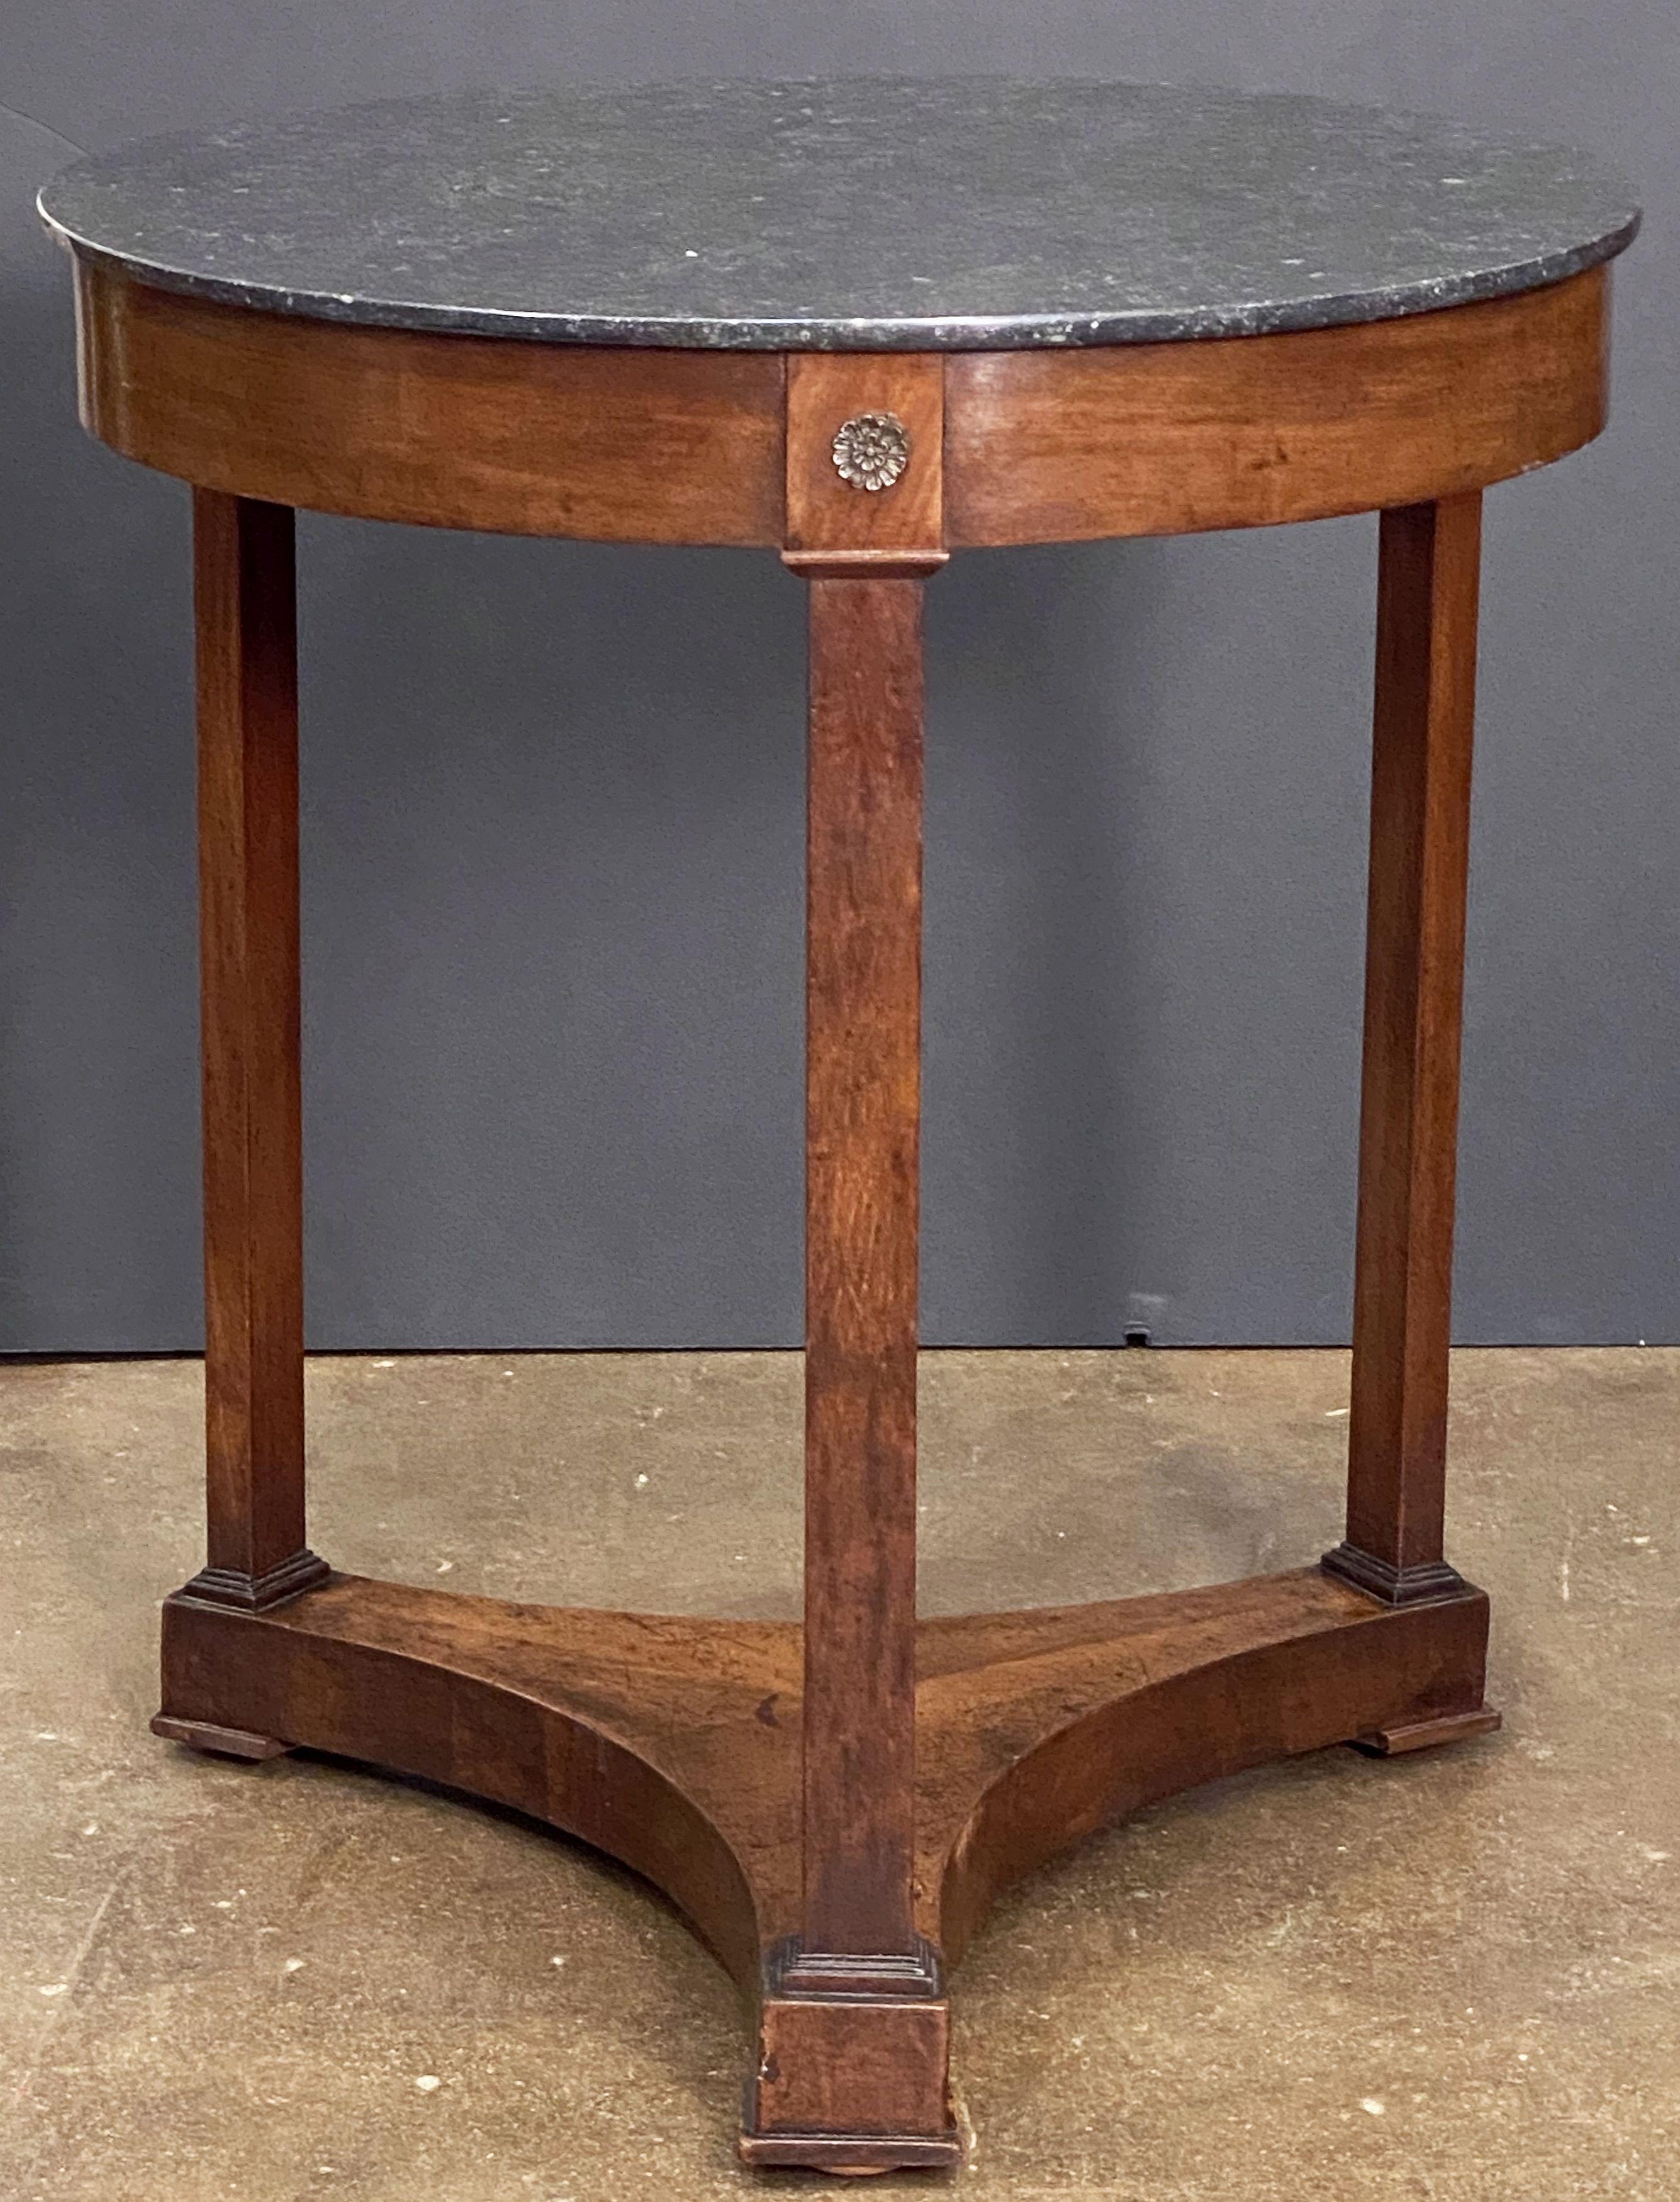 Metal French Gueridon or Round Table of Mahogany with Marble Top in the Empire Style